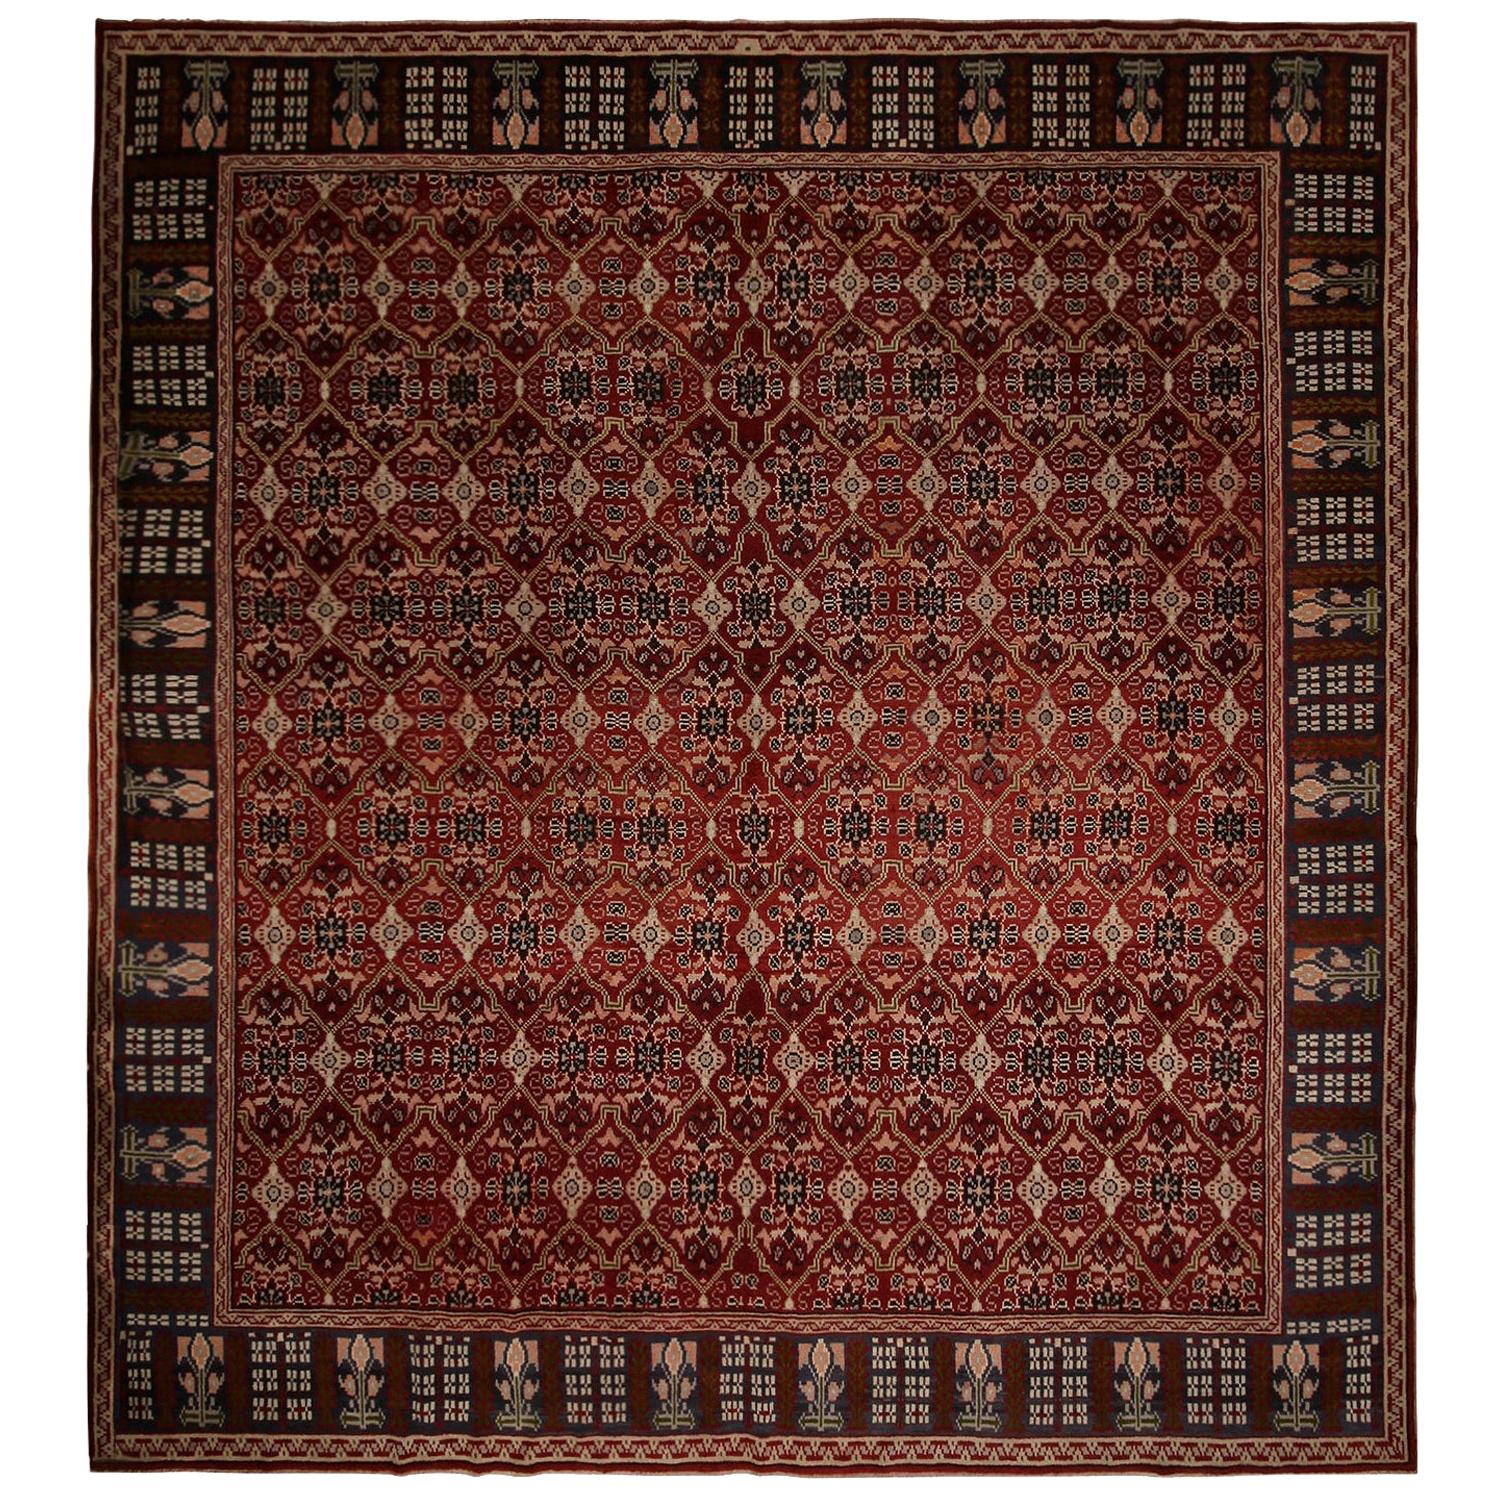 Antique Geometric Burgundy and Beige Wool Rug, Pink, Blue Accents by Rug & Kilim For Sale